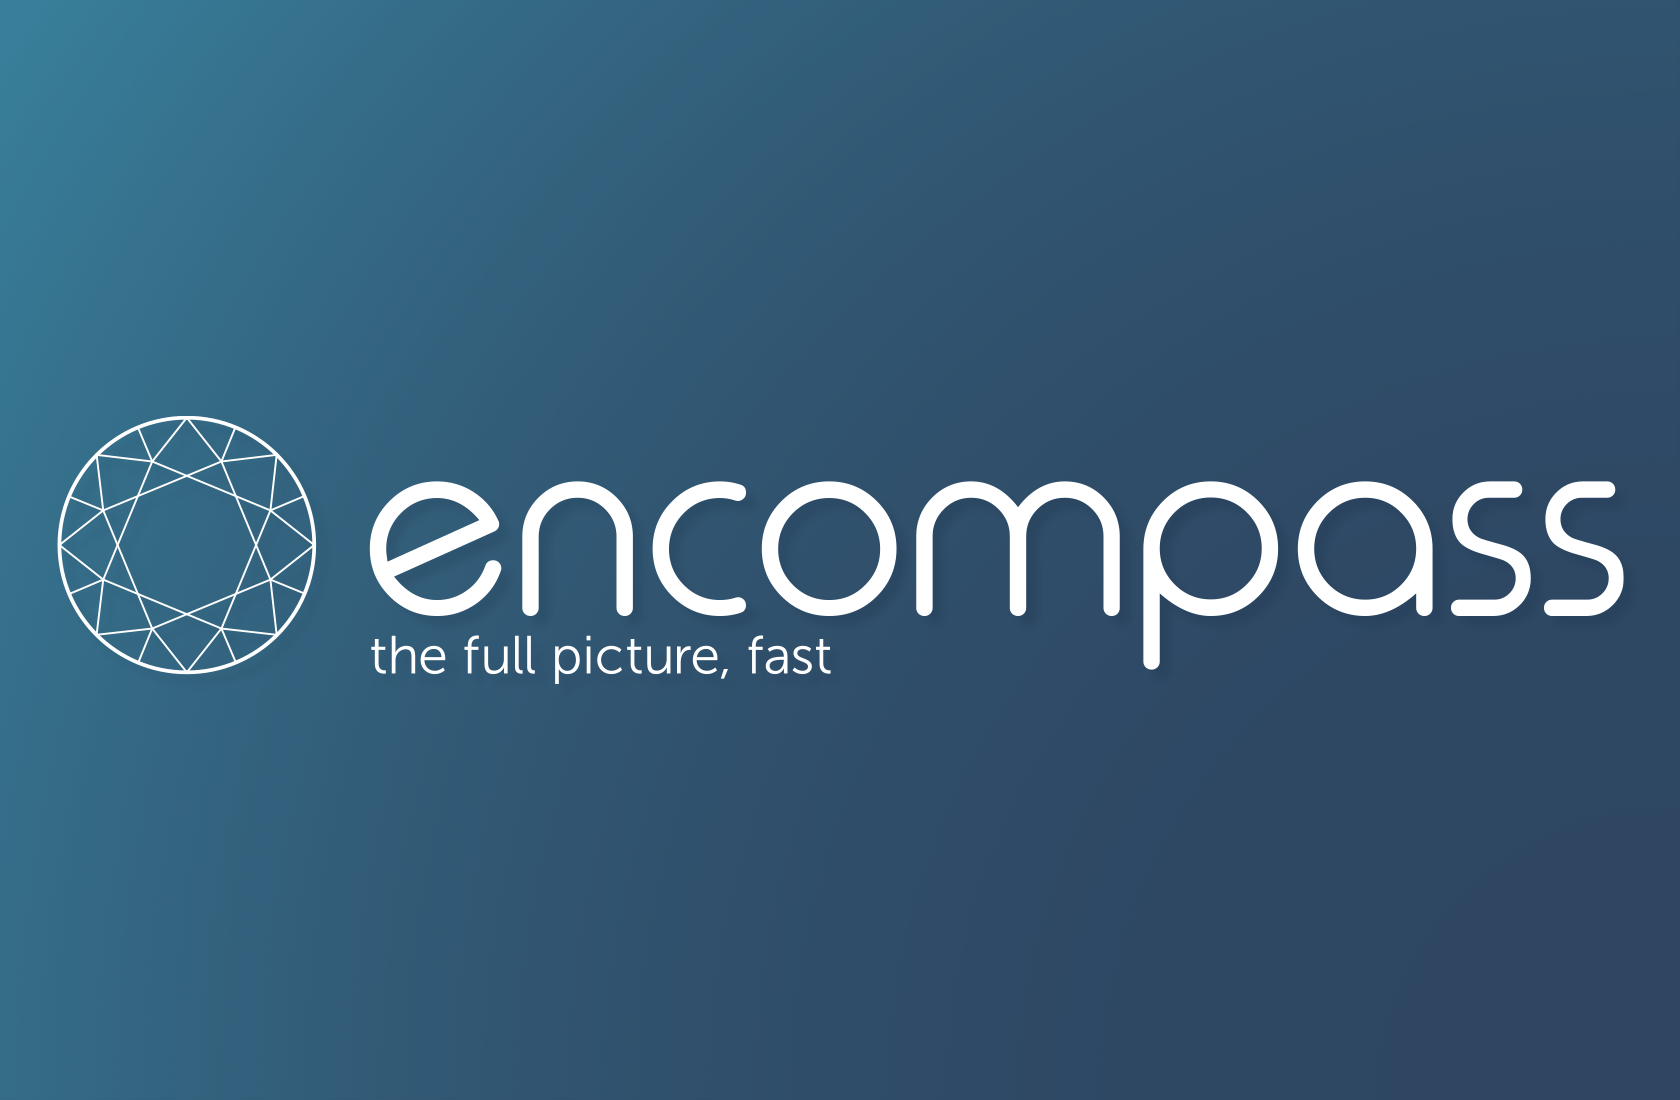 Encompass Corporation Appoints Cyndi Festa as Head of Data Sourcing